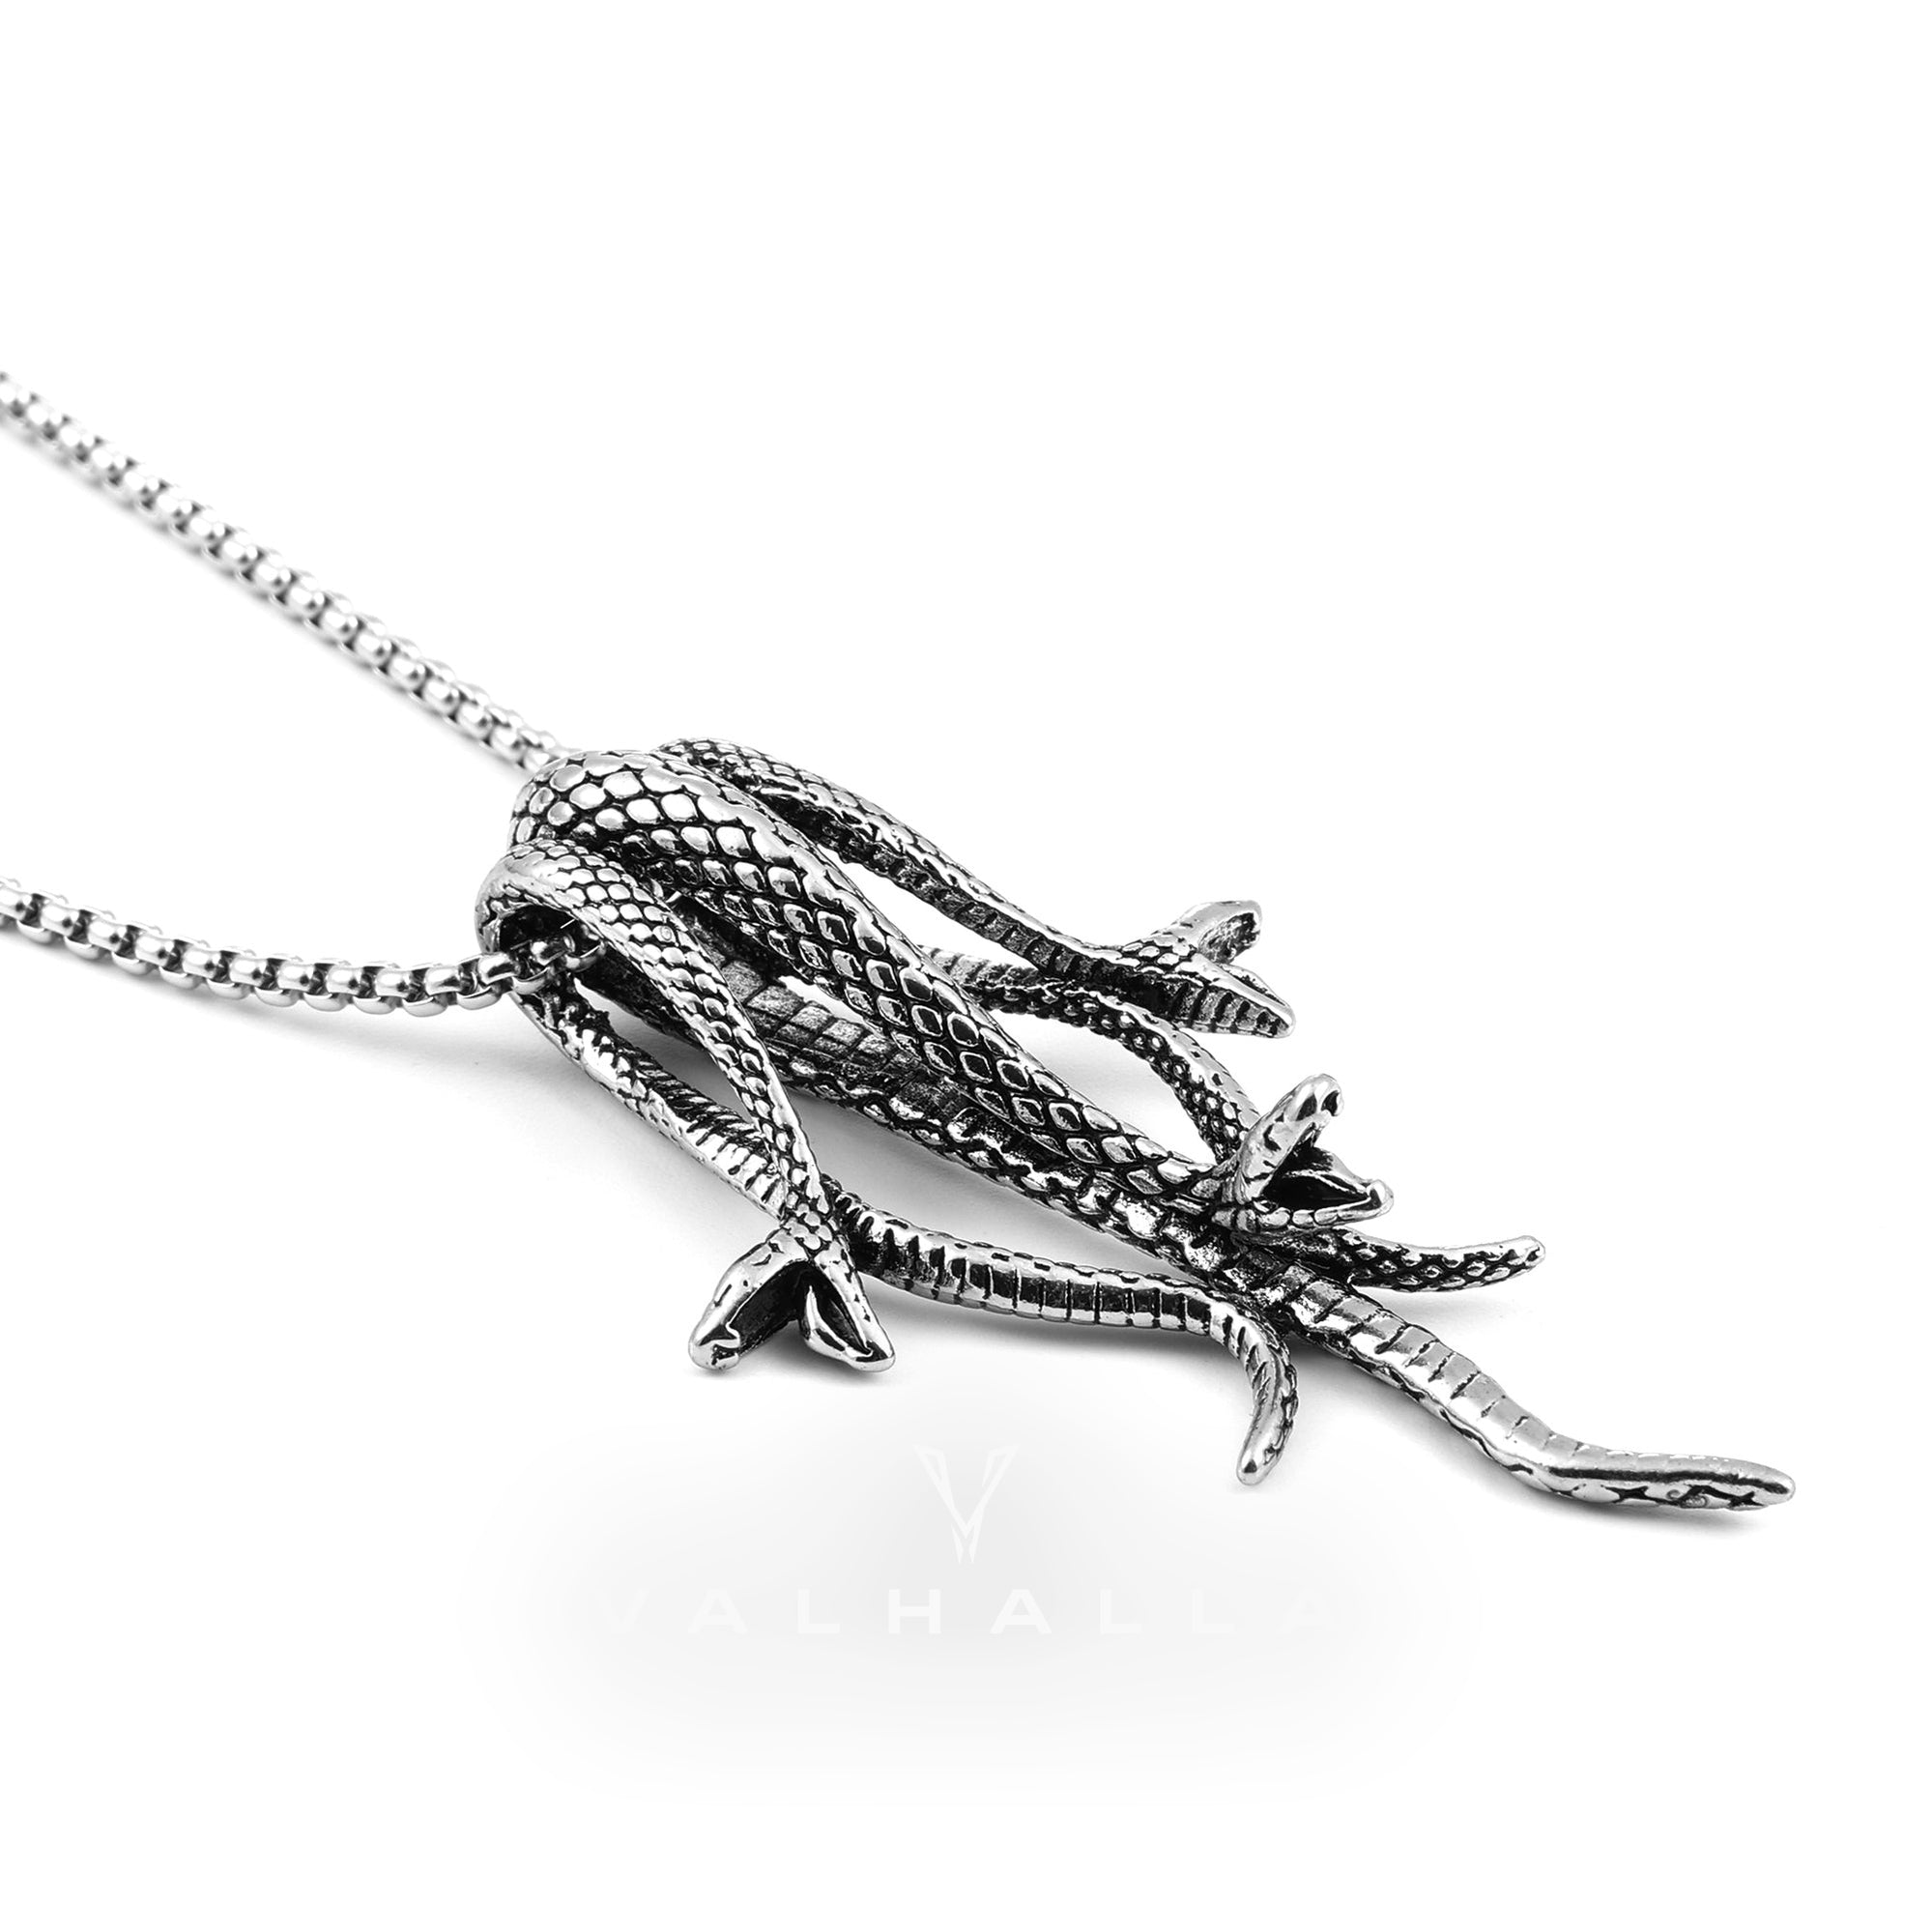 Three Snakes Stainless Steel Pendant & Chain